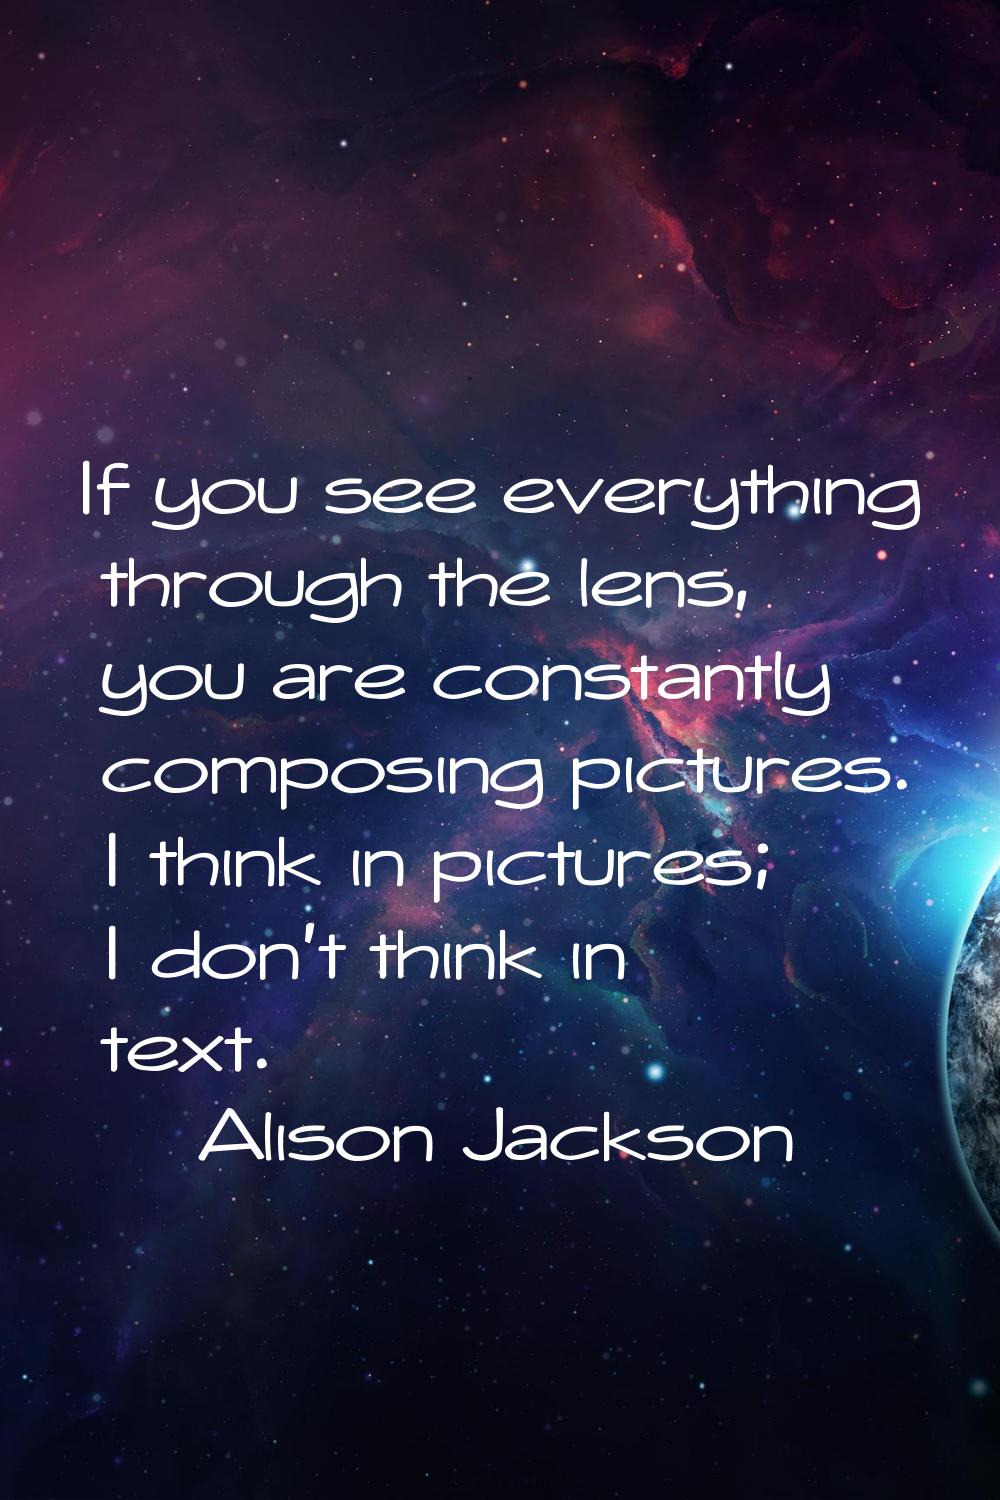 If you see everything through the lens, you are constantly composing pictures. I think in pictures;